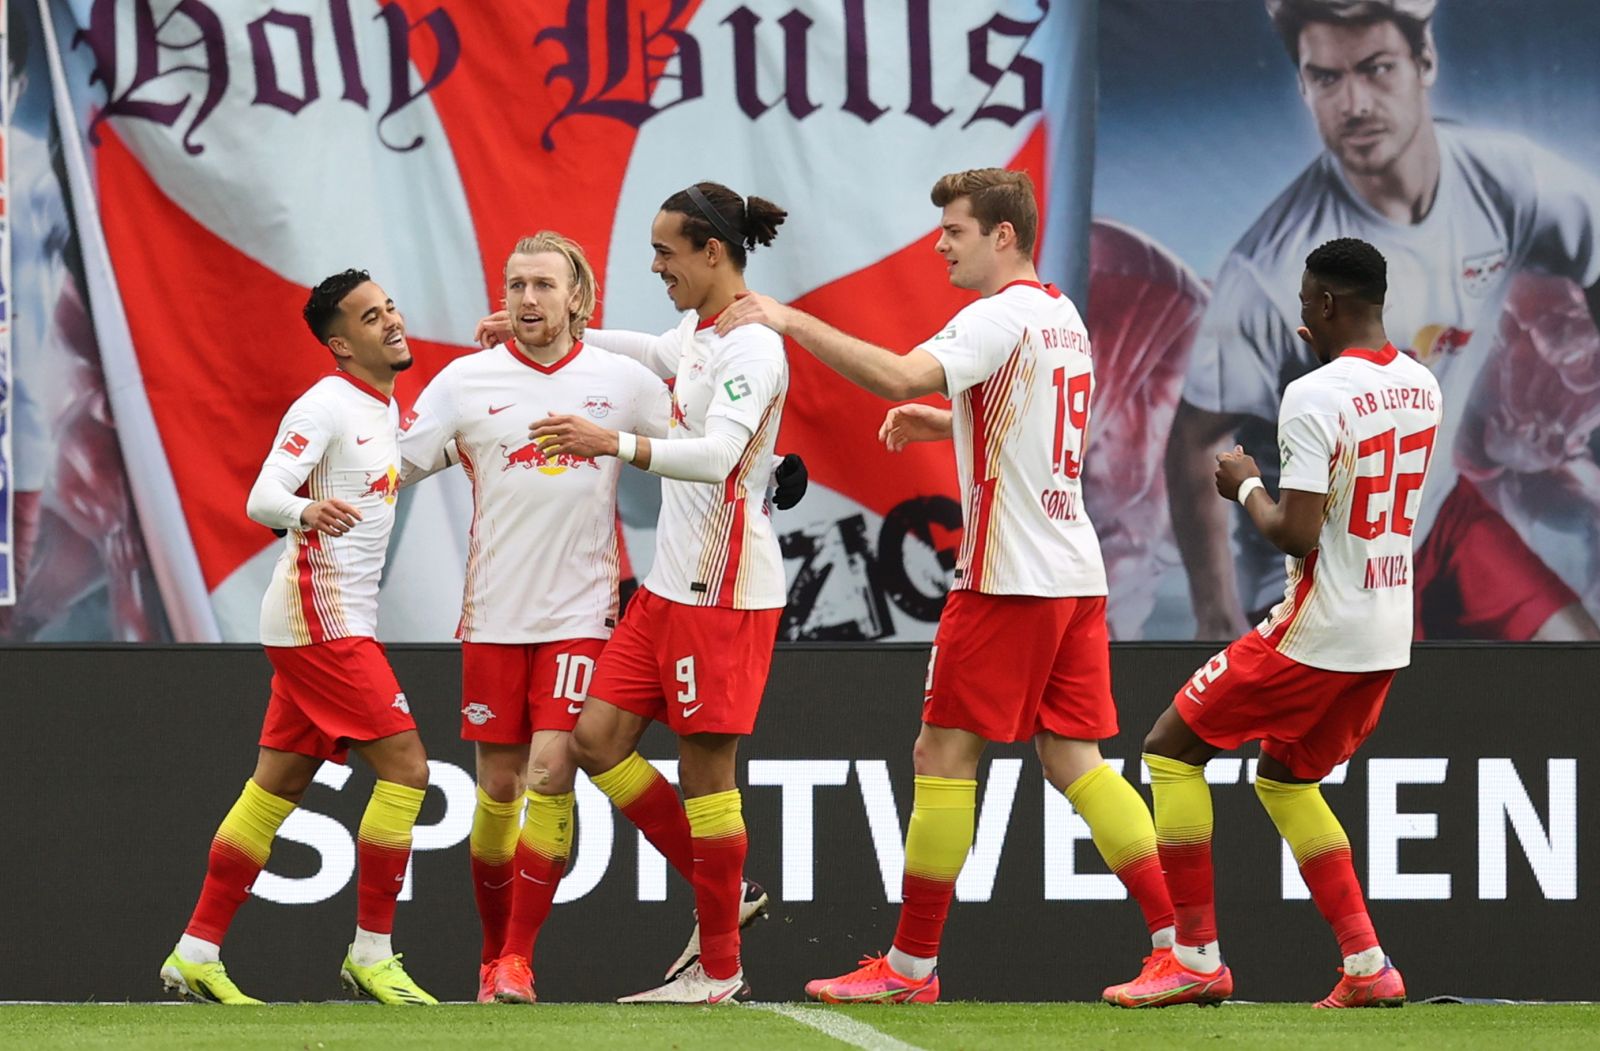 epa09074026 Emil Forsberg of RB Leipzig celebrates with Yussuf Poulsen, Alexander Sorloth and Nordi Mukiele after scoring their side's first goal  during the Bundesliga match between RB Leipzig and Eintracht Frankfurt at Red Bull Arena in Leipzig, Germany, 14 March 2021.  EPA/BORIS STREUBEL / POOL DFL regulations prohibit any use of photographs as image sequences and/or quasi-video.